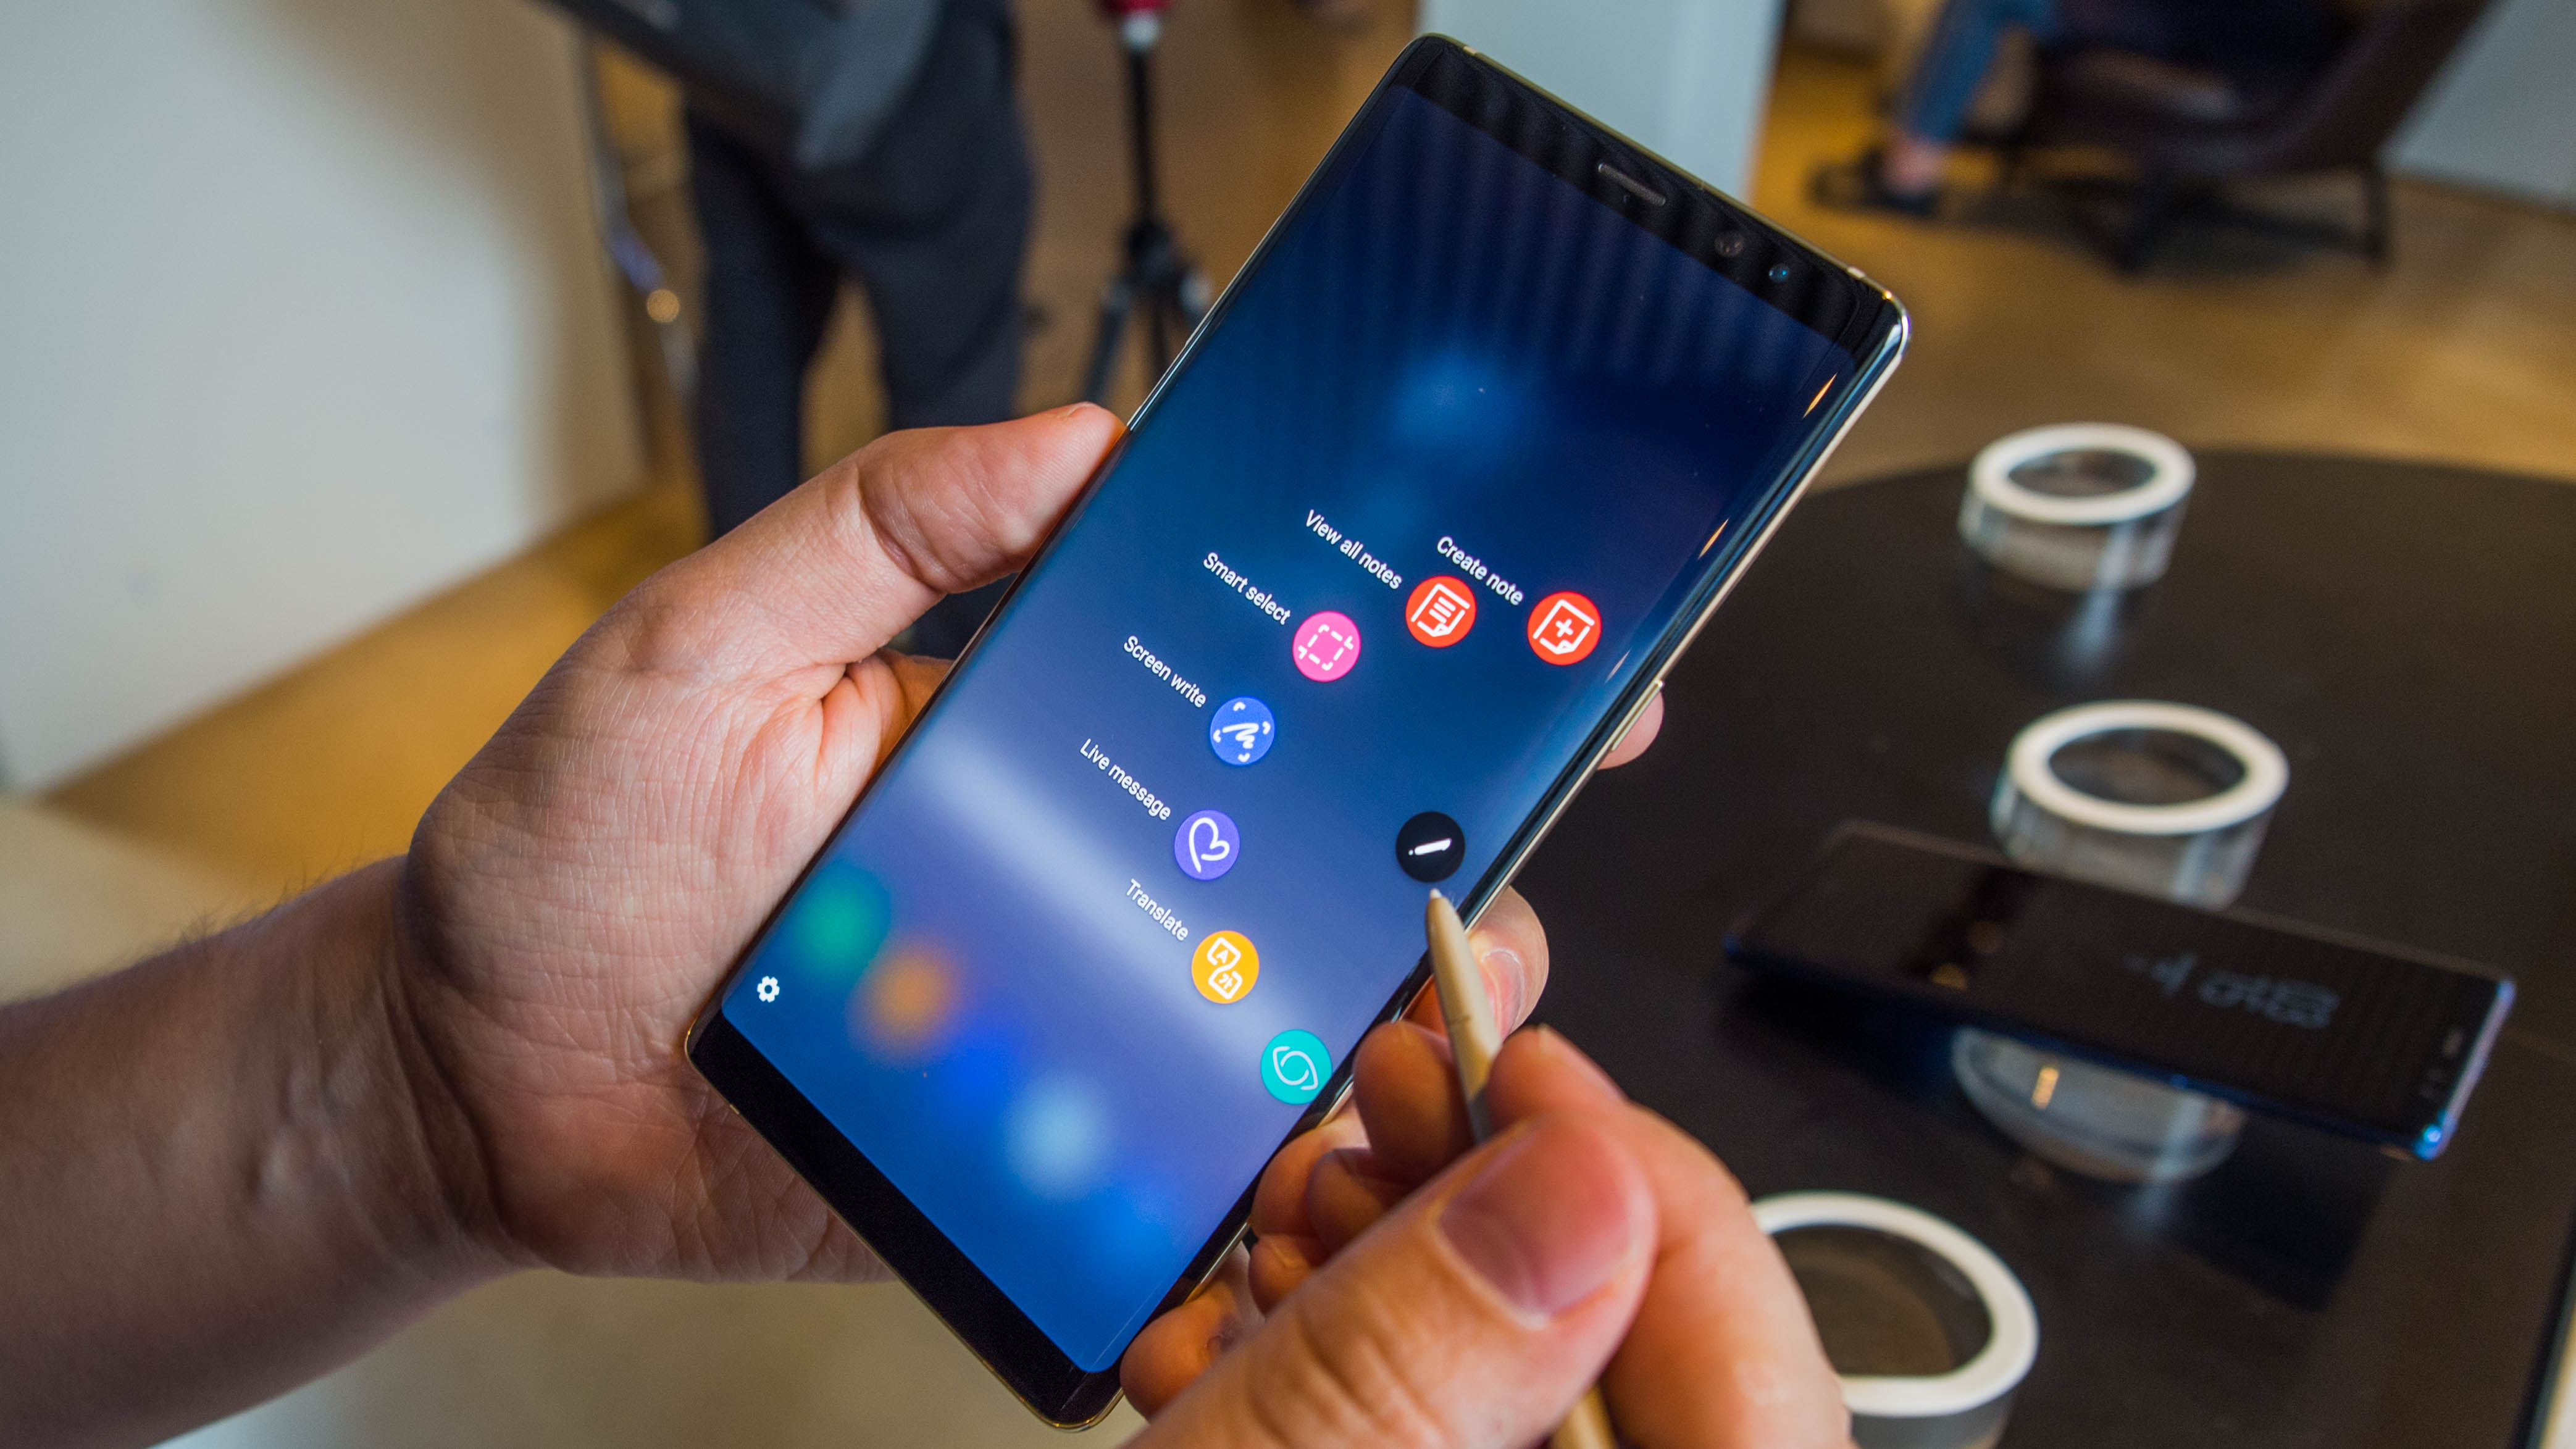 Galaxy Note 9 512GB variant may be exclusive to few markets